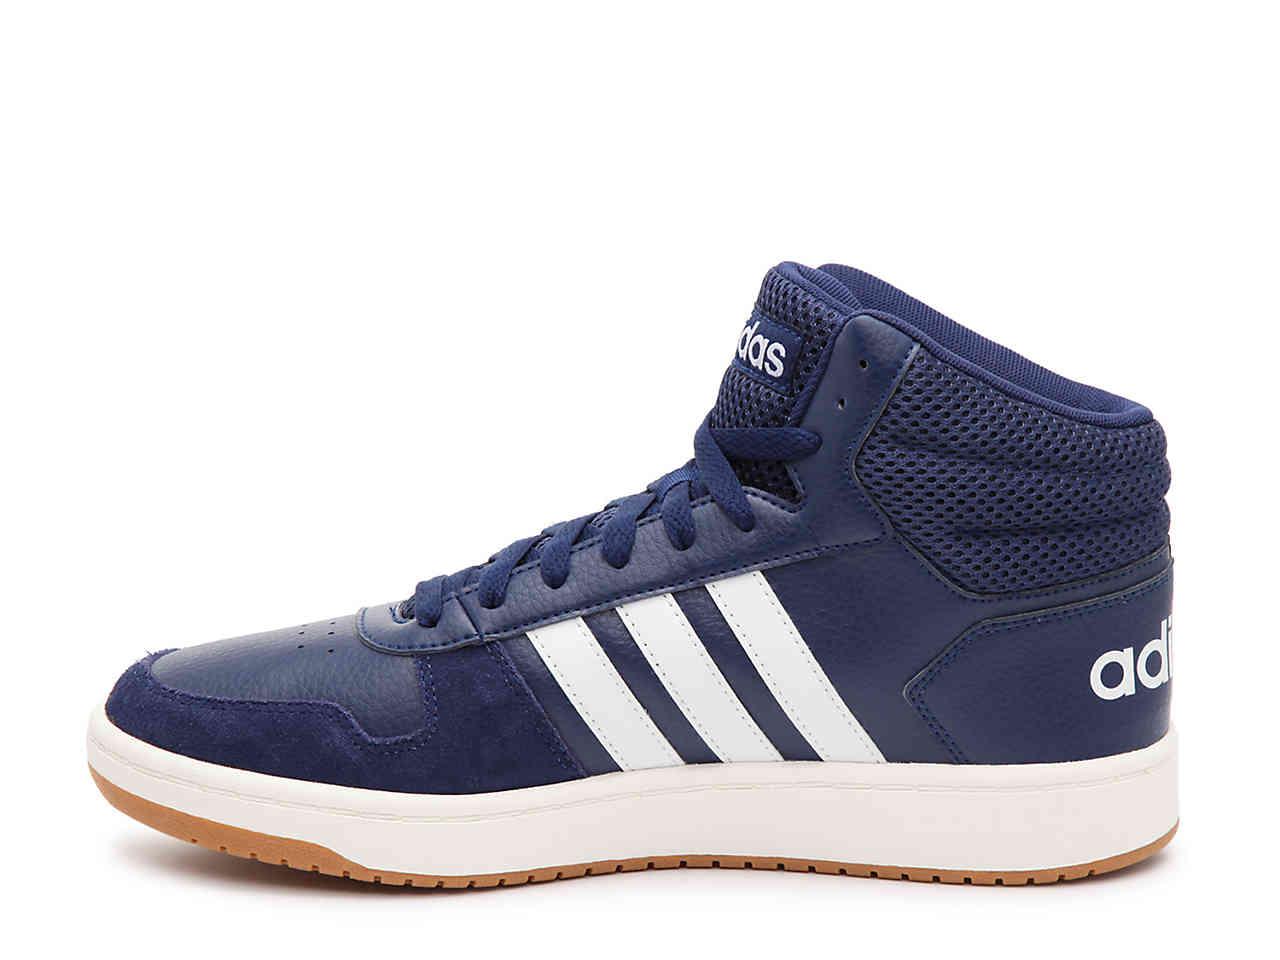 adidas Leather Hoops 2.0 Mid Sneaker in Navy (Blue) for Men - Lyst